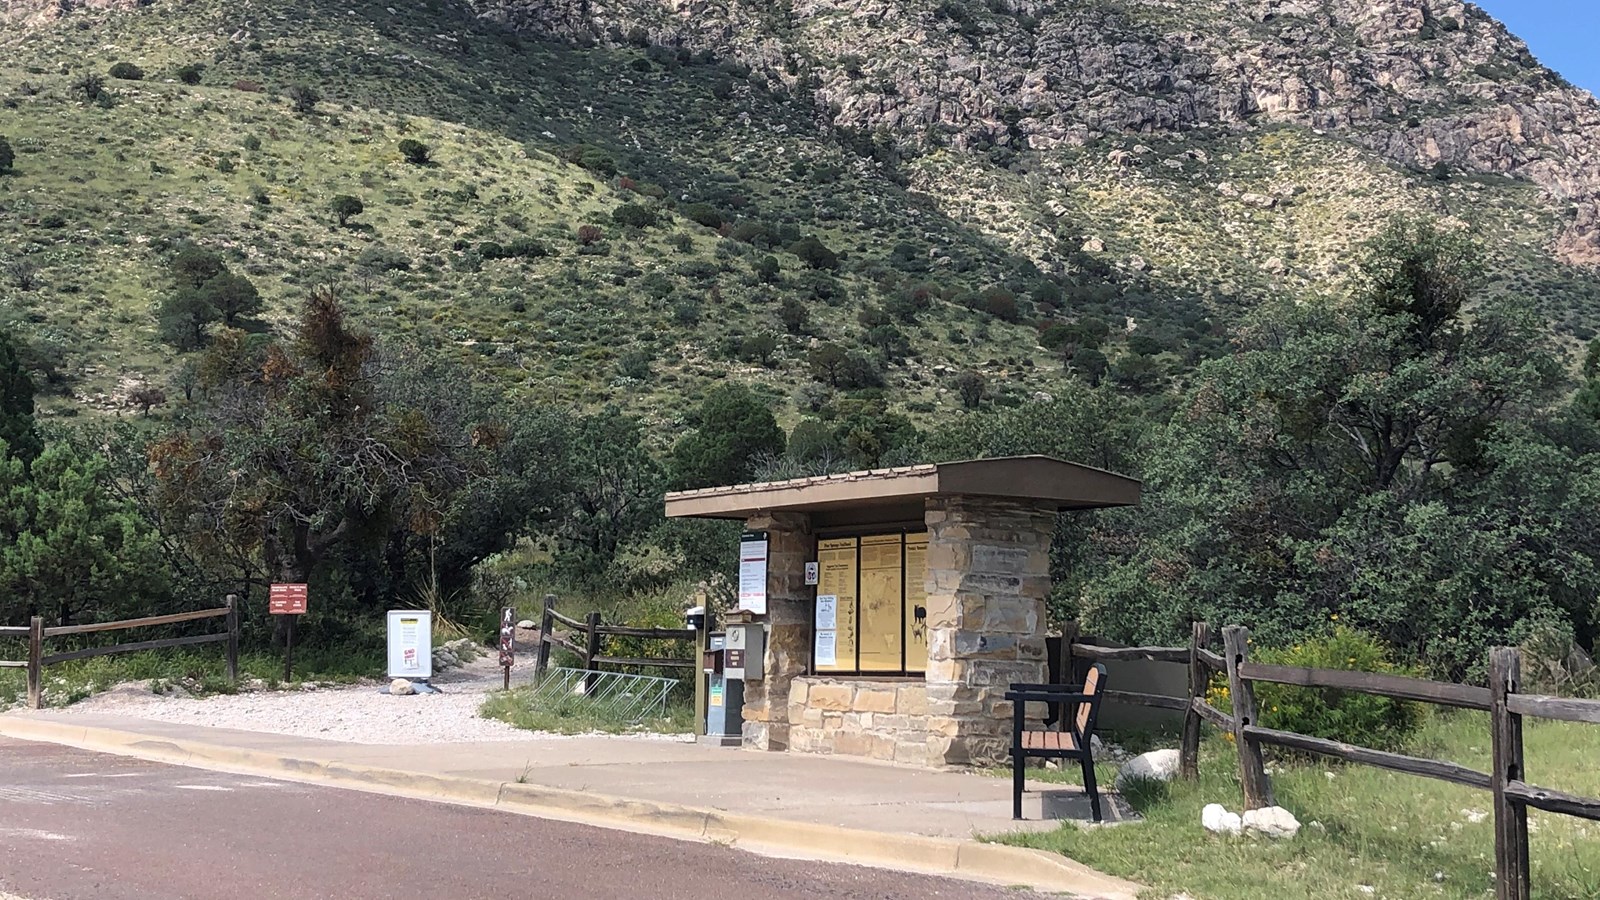 A stone kiosk with trail information marks the beginning of a trail in a desert mountain landscape. 